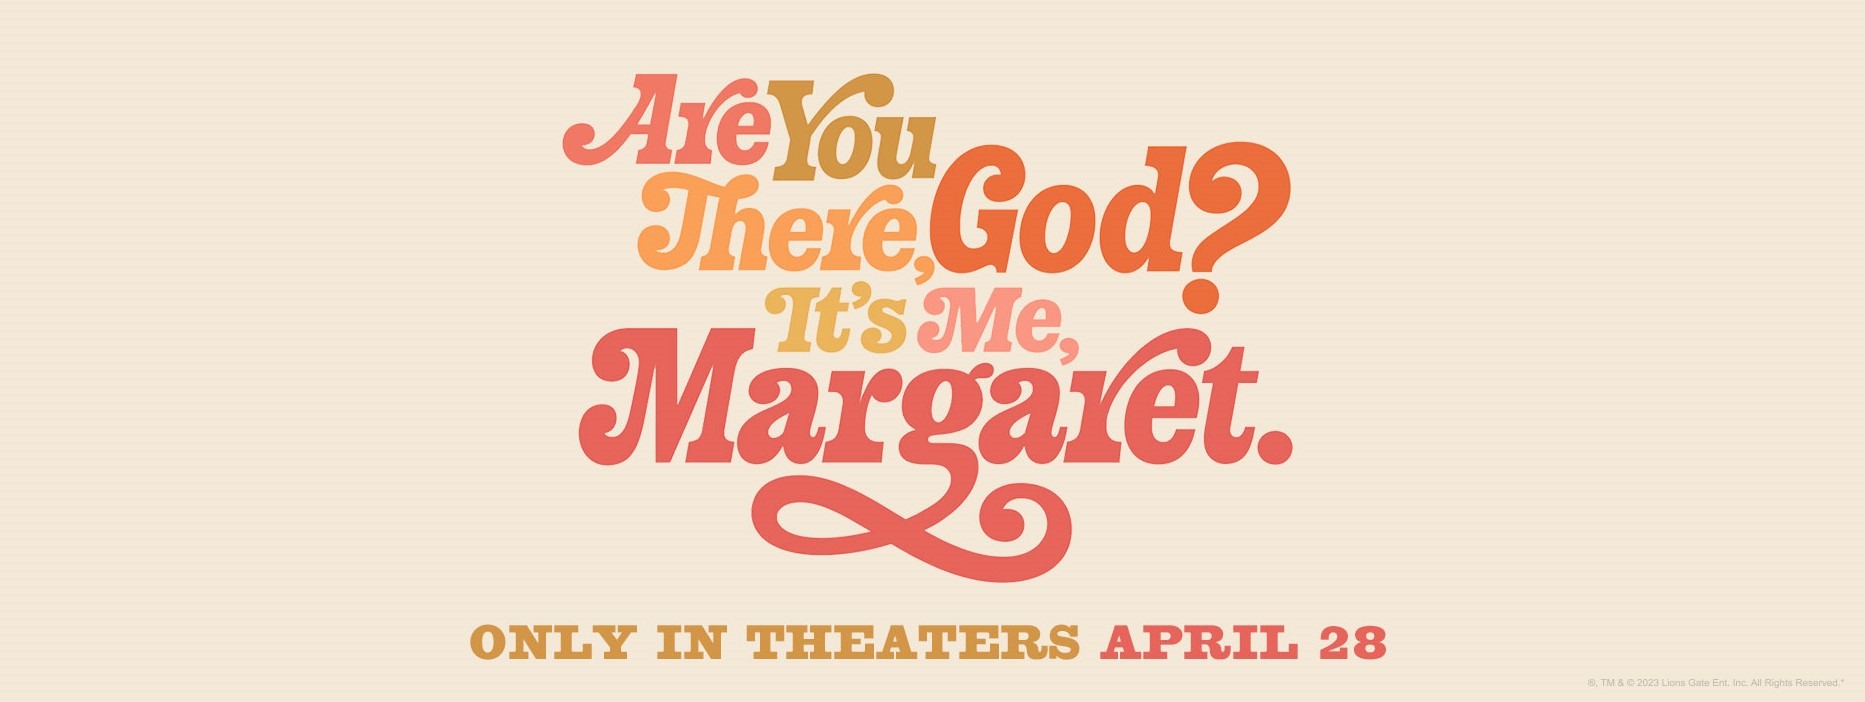 Are You There God? It’s Me, Margaret.  Only in Theaters – April 28.  Click through to view trailer.